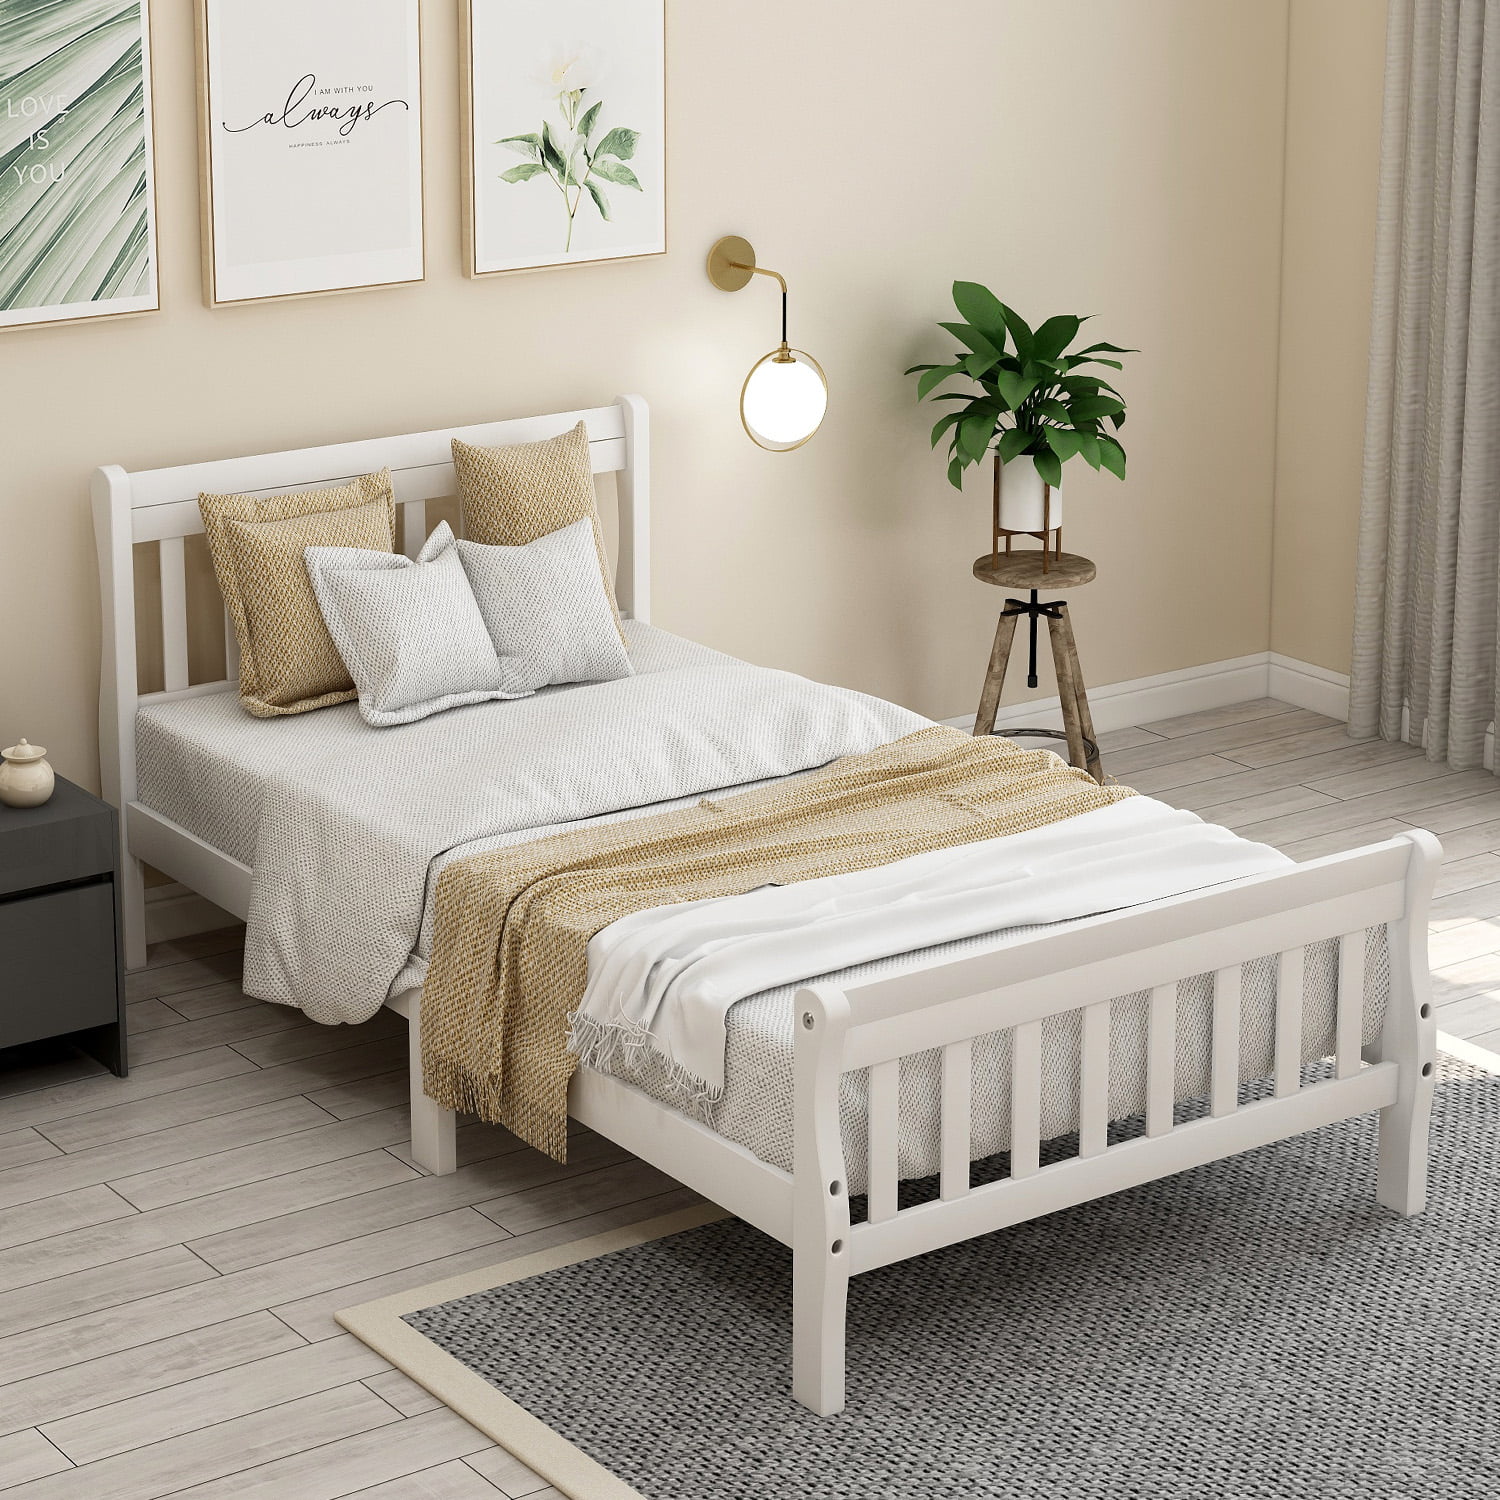 Home Bedroom Details about   Twin Size Metal Bed Frame w/ Wood Slat Design White 